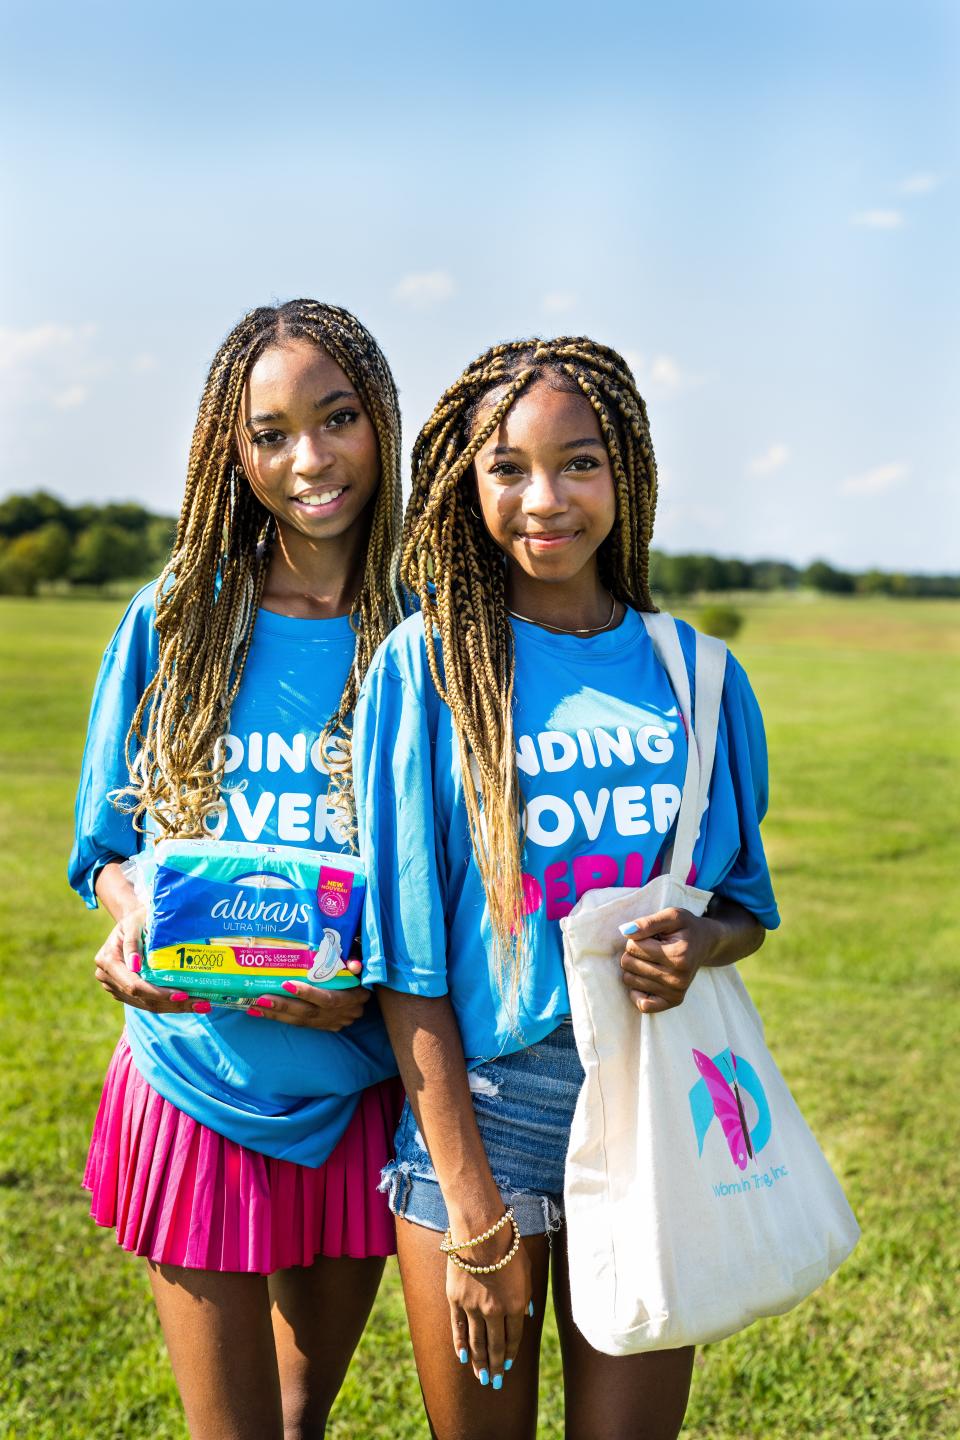 Brooke and Breanna Bennett, co-founders of Women in Training, Inc., receive a donation of Always pads to distribute to girls in their local community in Montgomery.